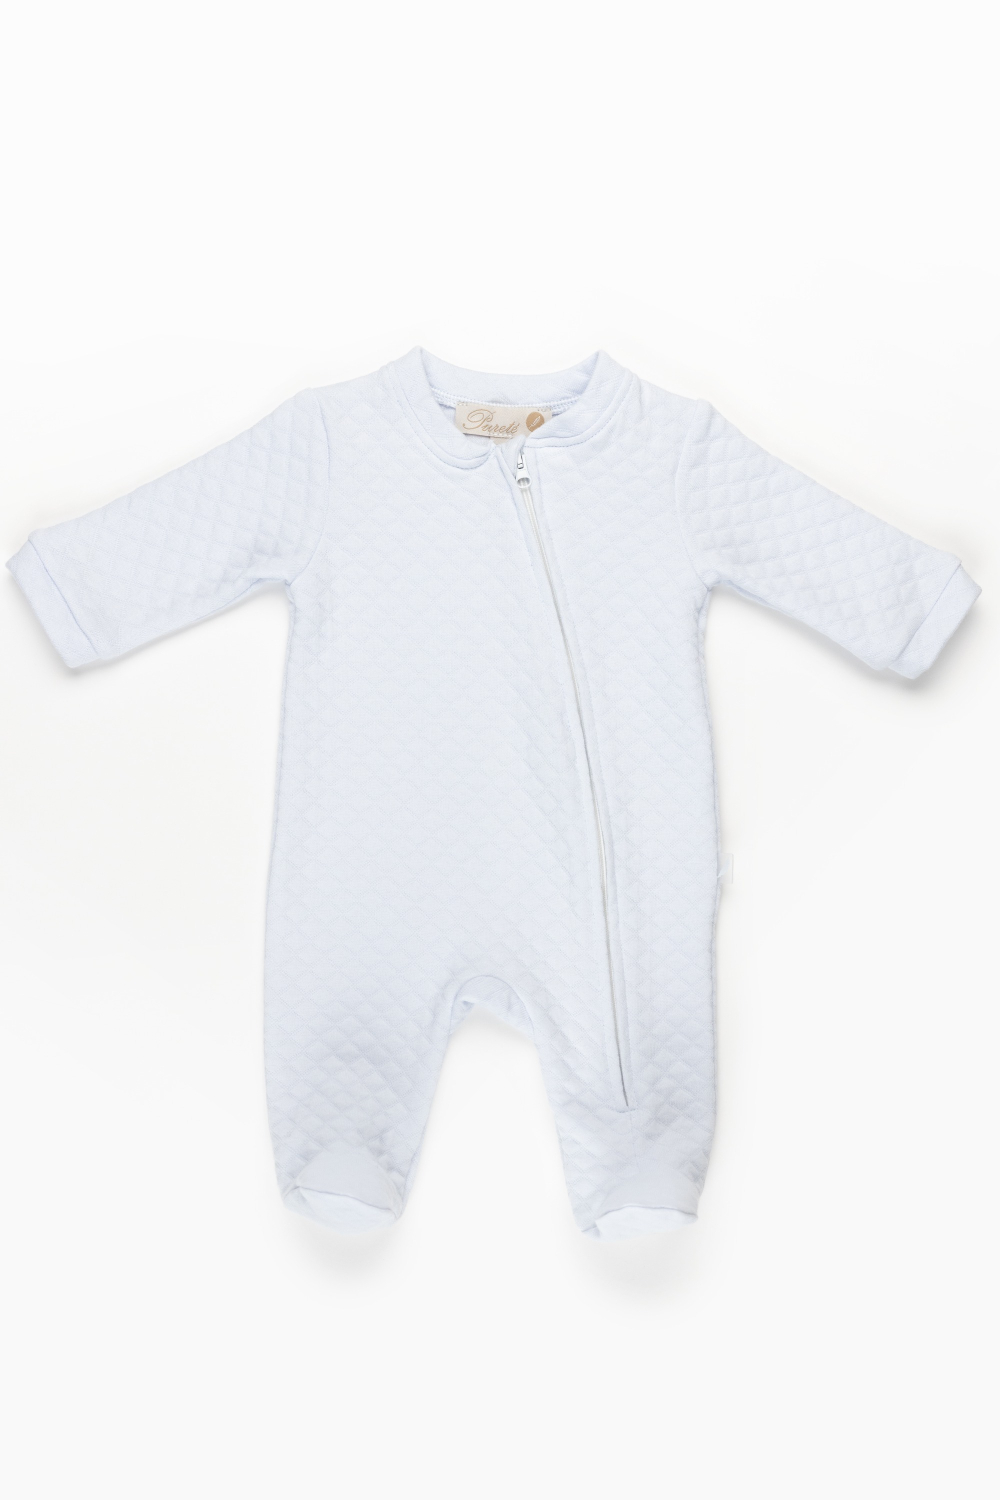 Blue quilted baby outfit